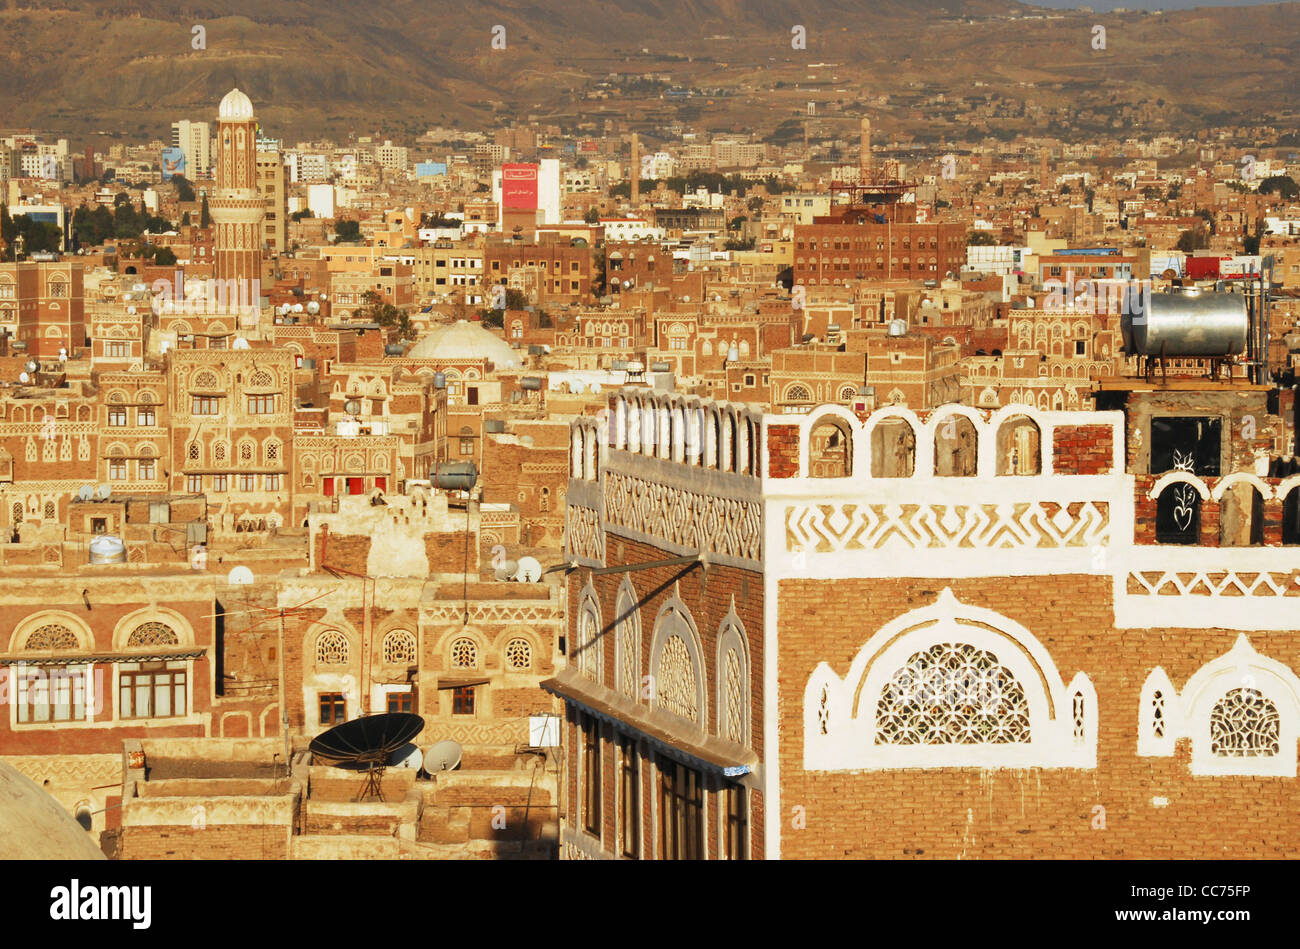 Yemen, Sanaa, cityscape with buildings and decorative white carvings, mountains in the background Stock Photo